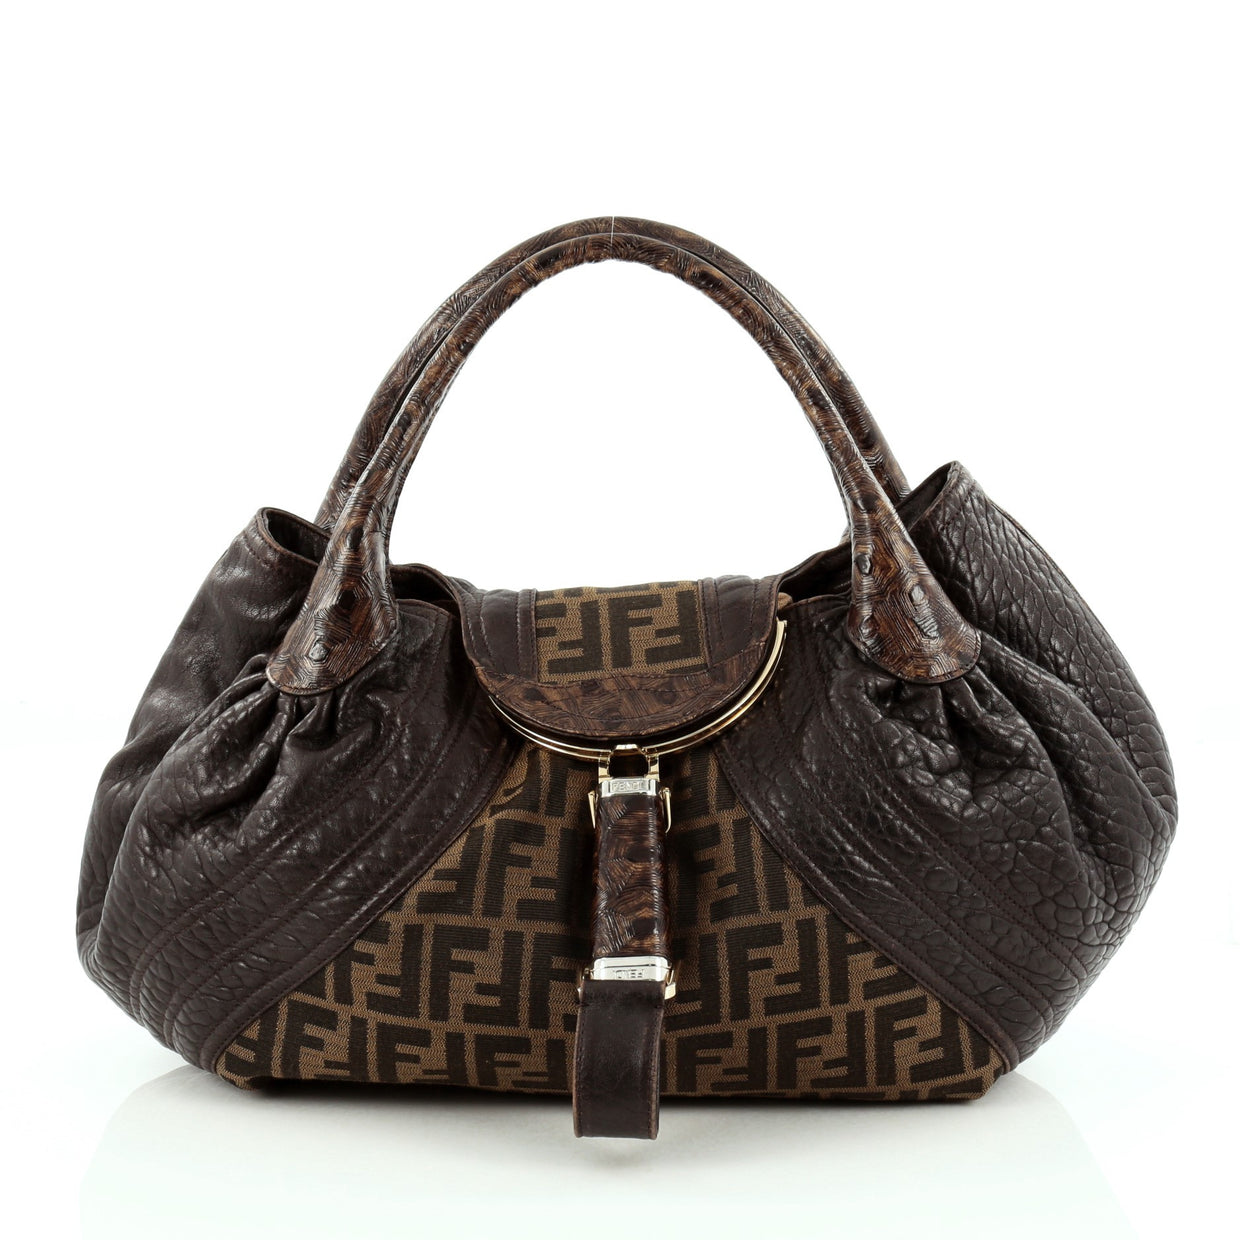 Buy Fendi Tortoise Spy Bag Zucca Canvas and Leather Brown 1328401